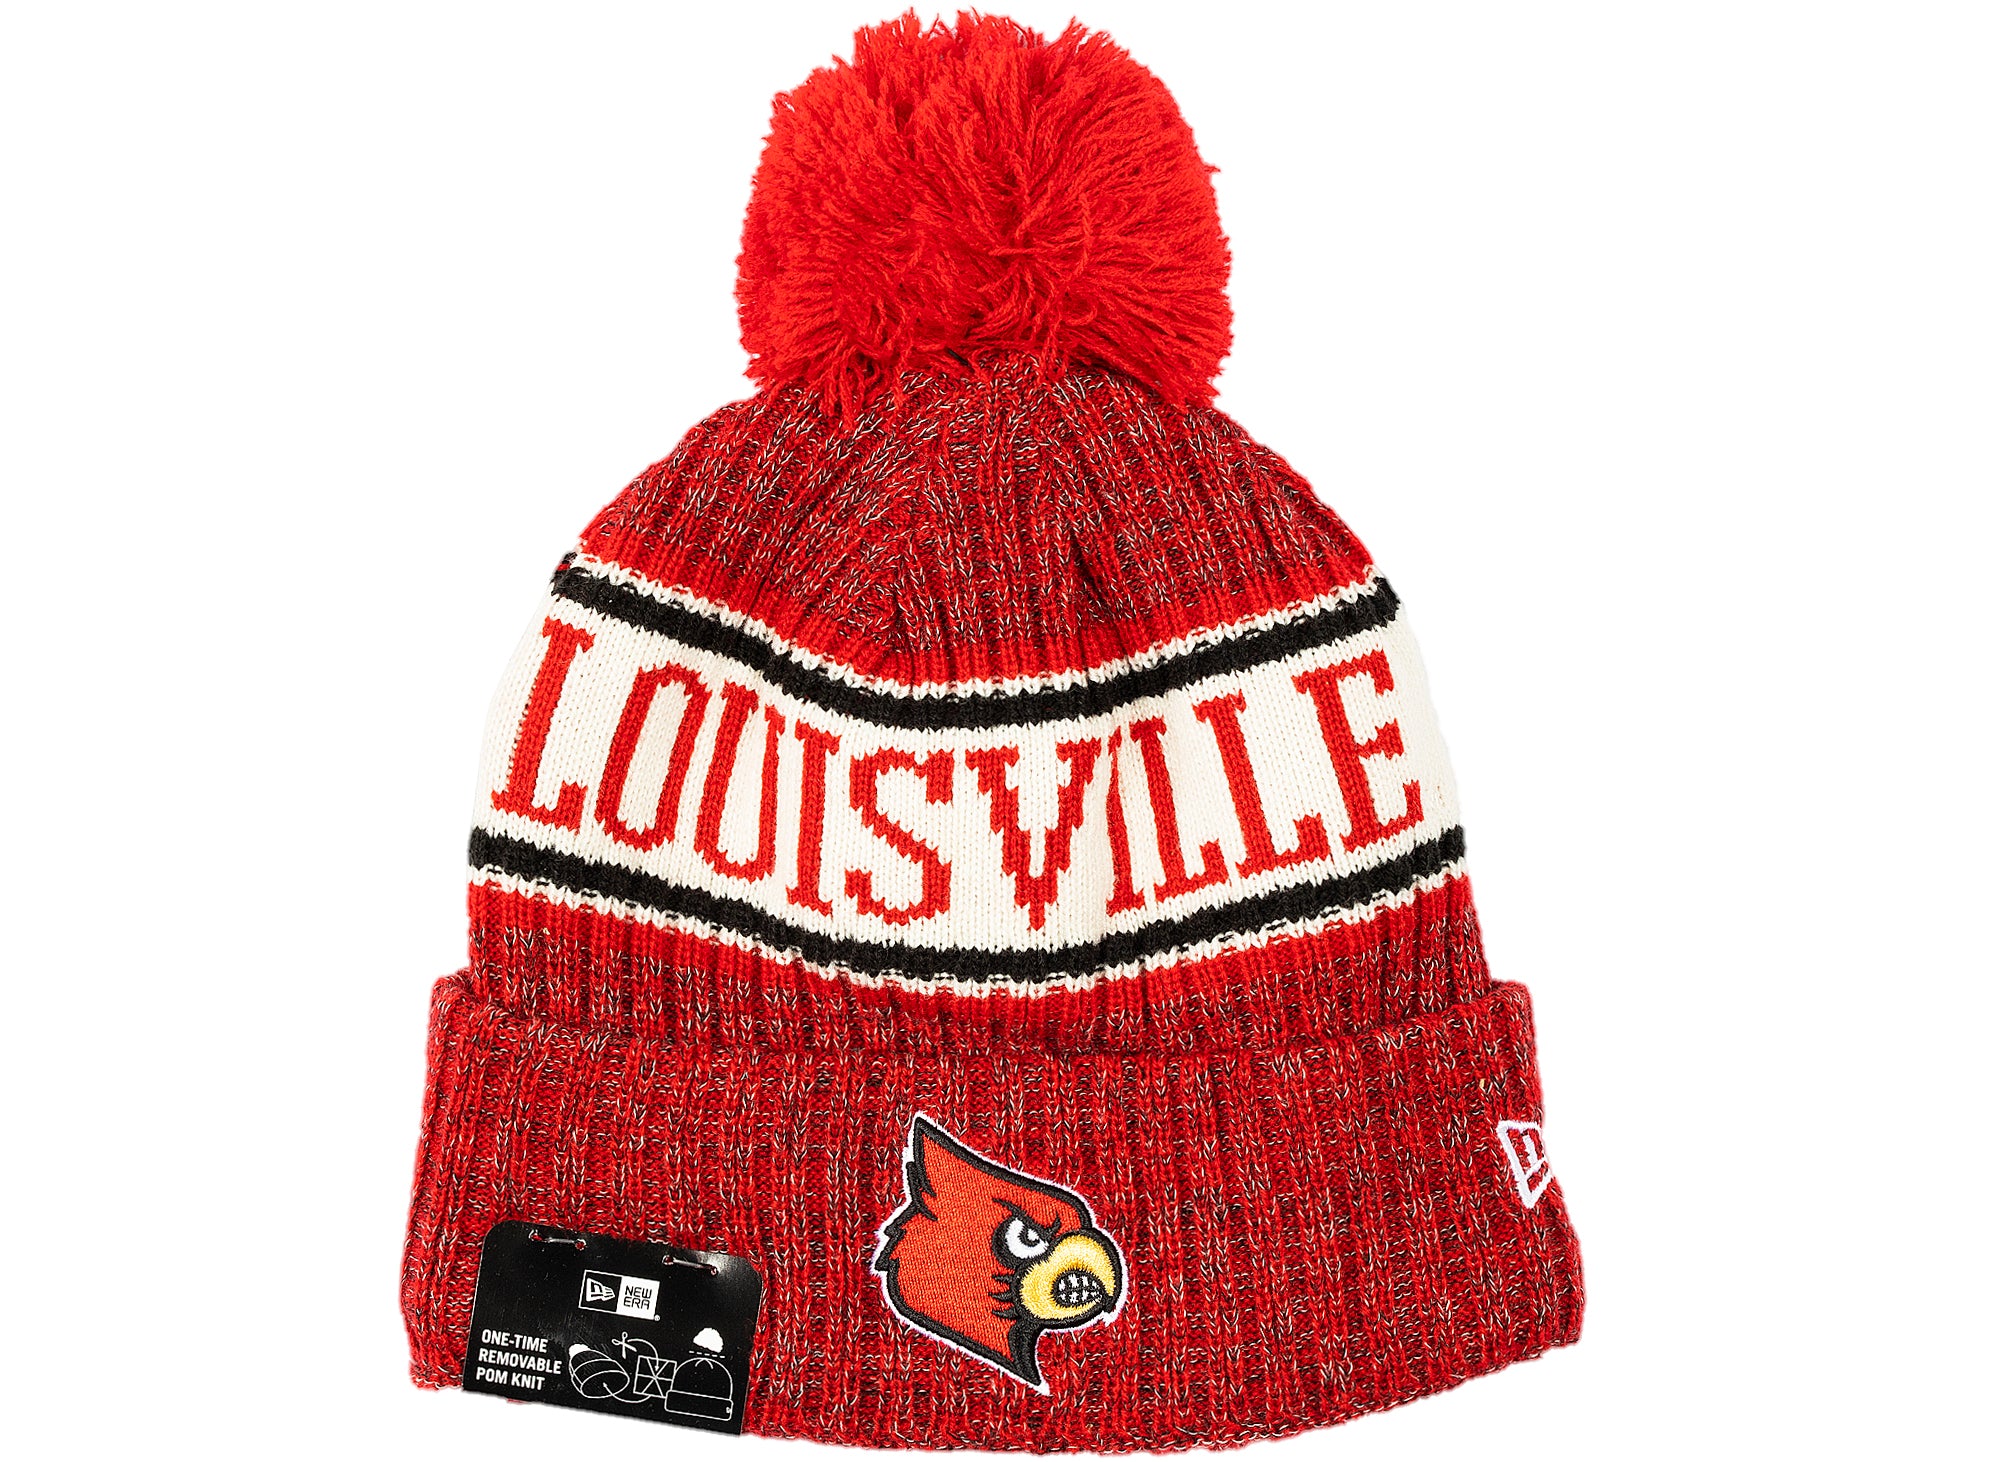 LOUISVILLE CARDINALS NCAA BEANIE TOP OF THE WORLD SIMPLE KNIT SKI CAP HAT  NWT!